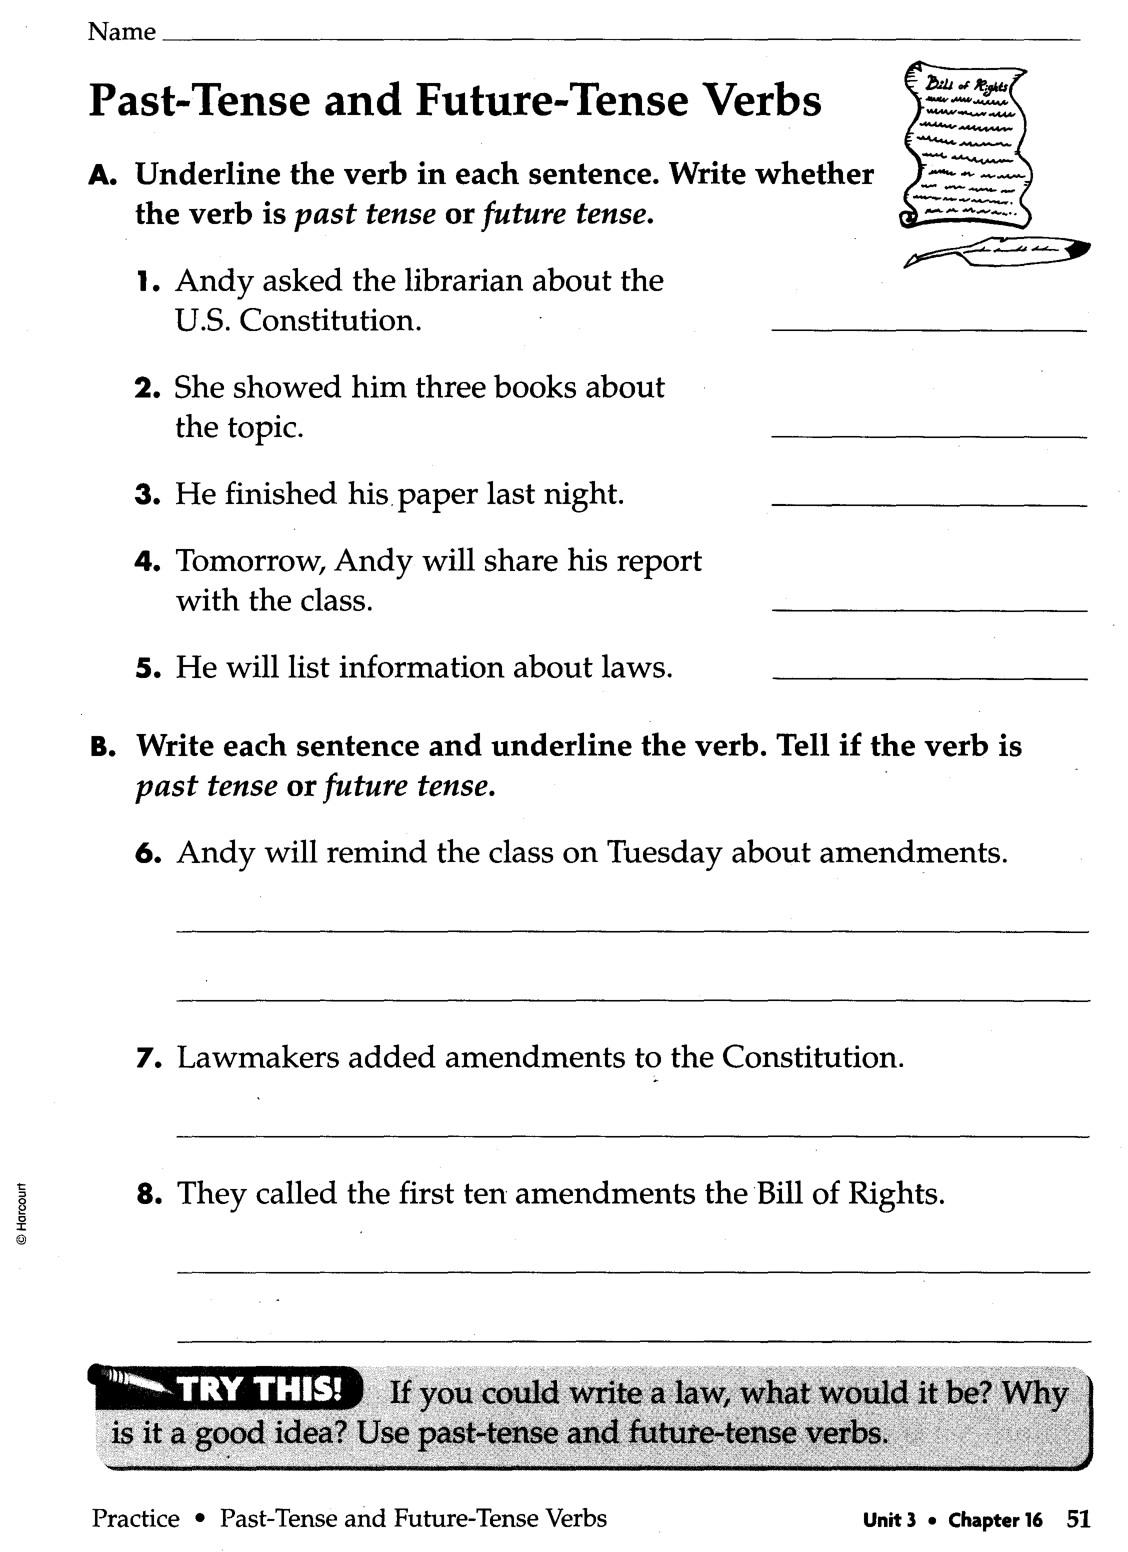 simple-tense-present-past-future-online-worksheet-for-5th-grade-you